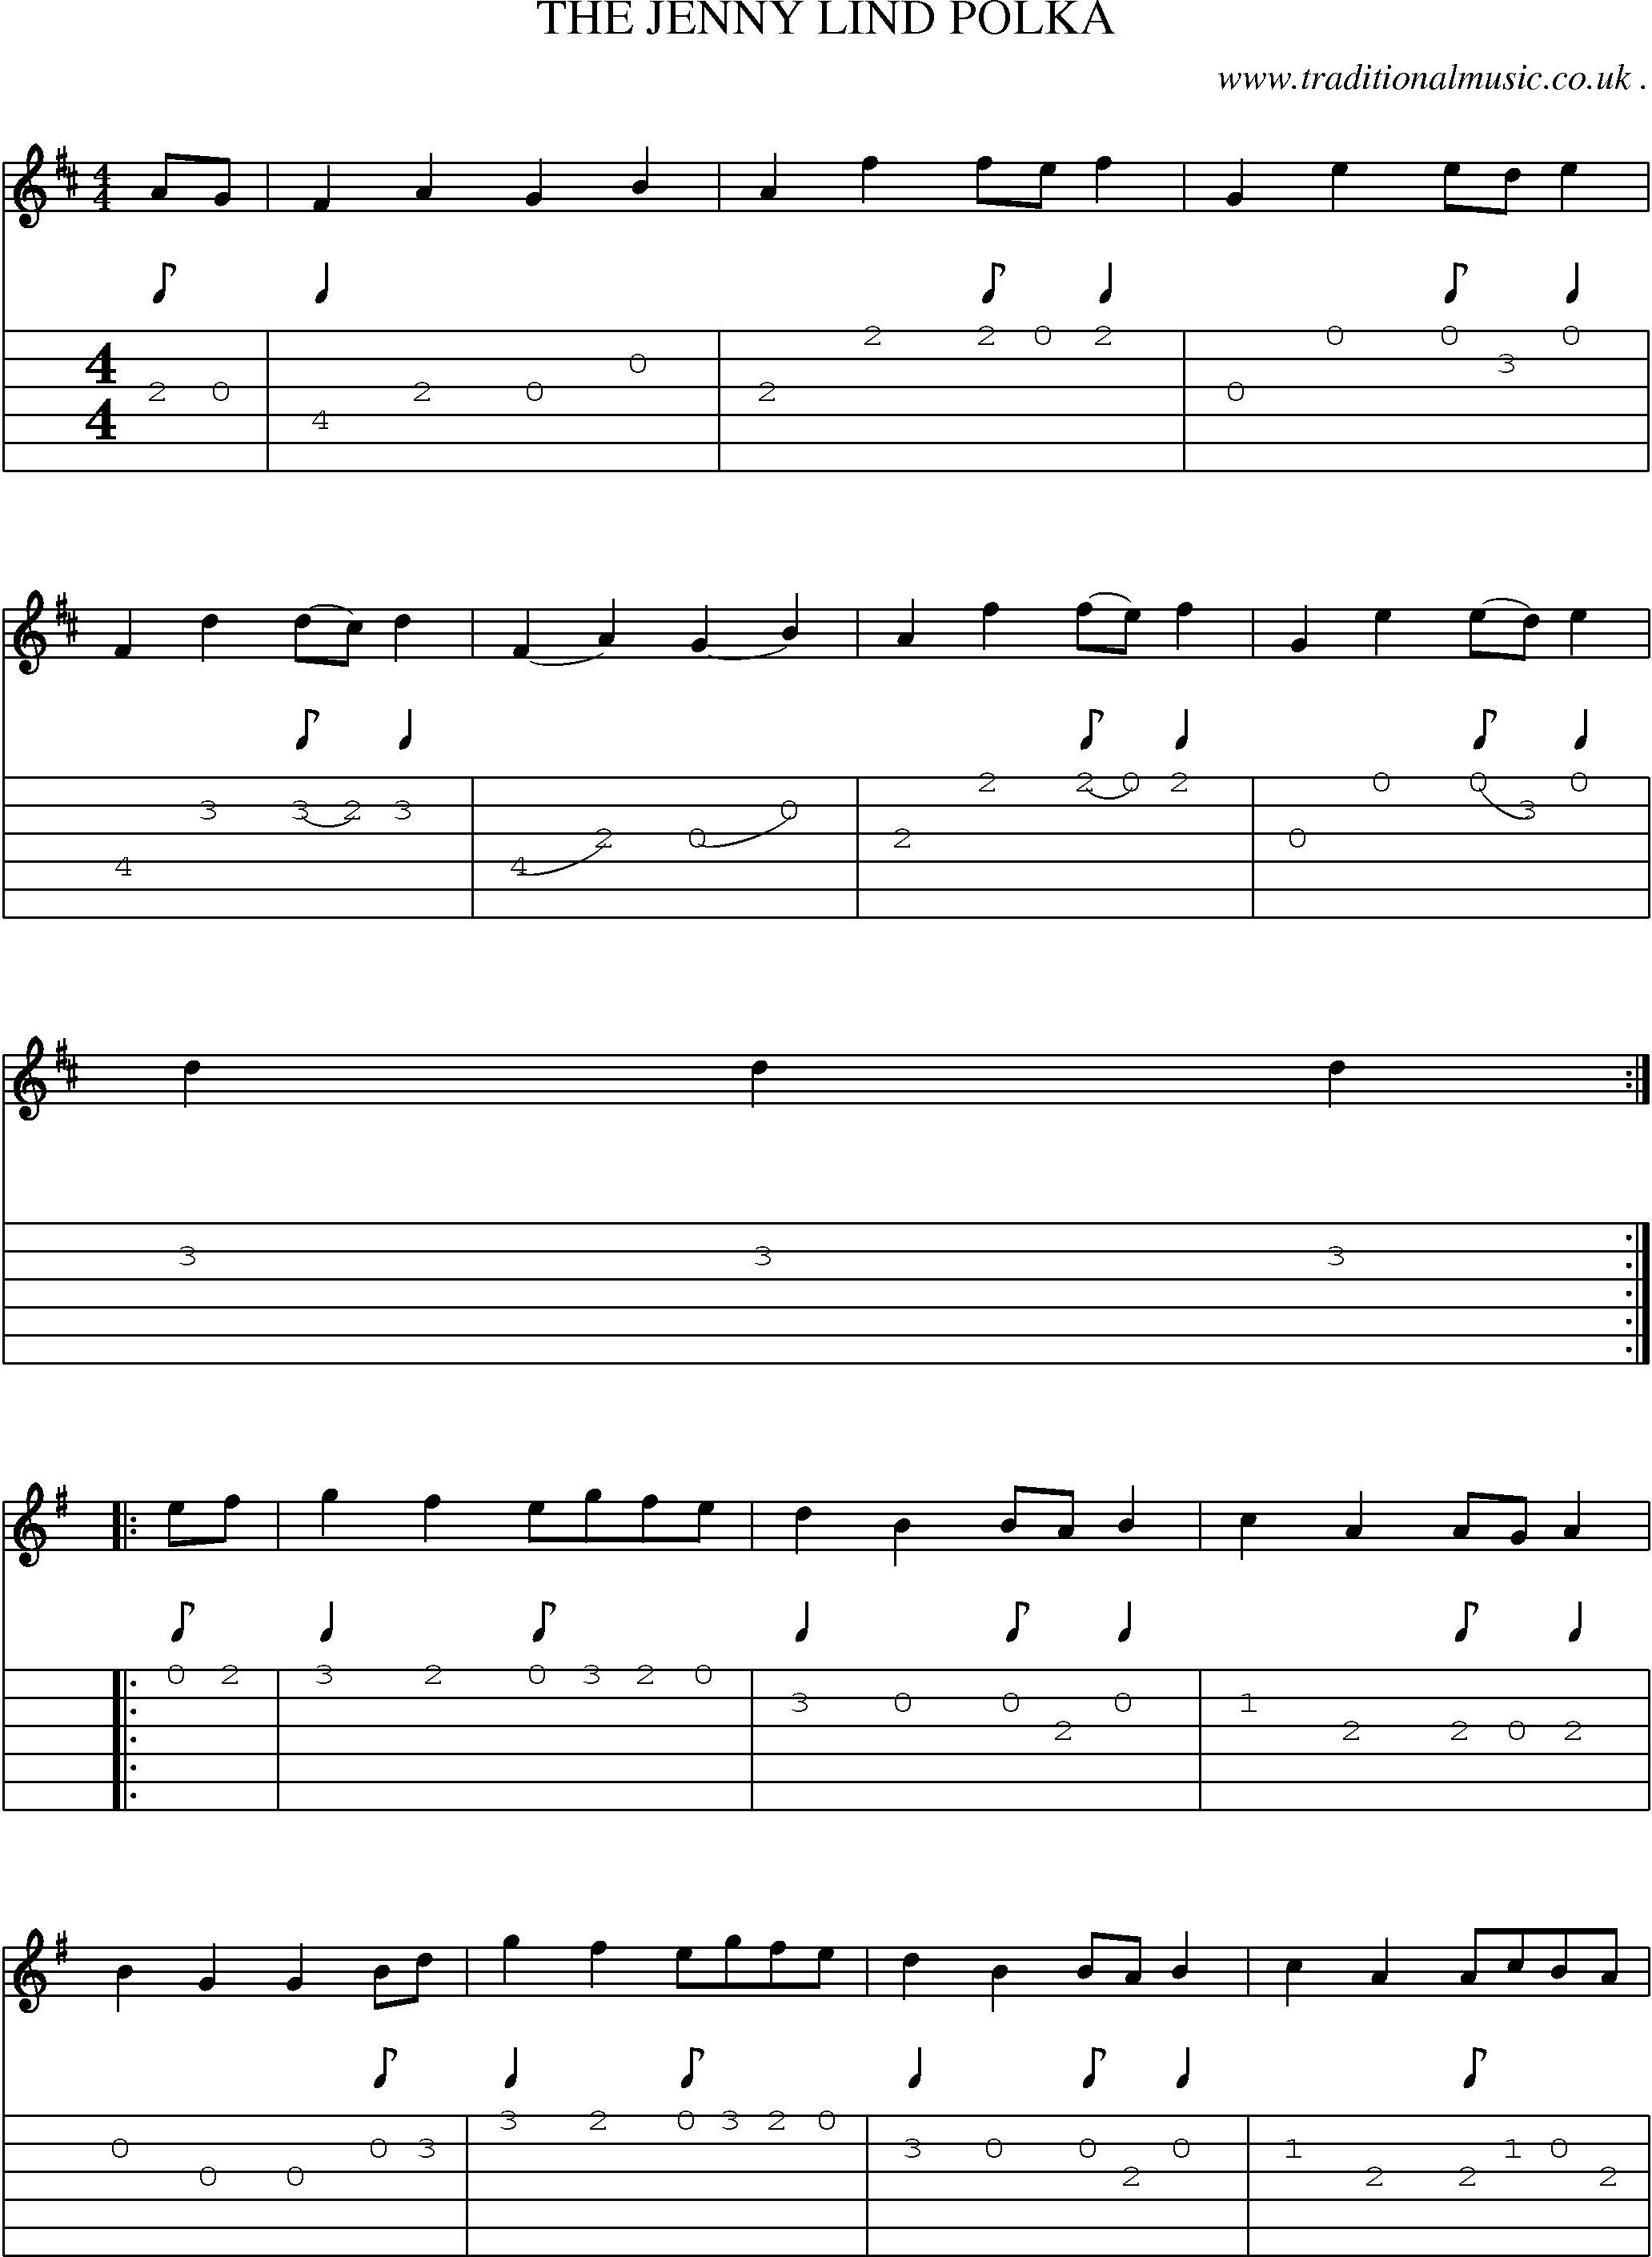 Music Score and Guitar Tabs for The Jenny Lind Polka